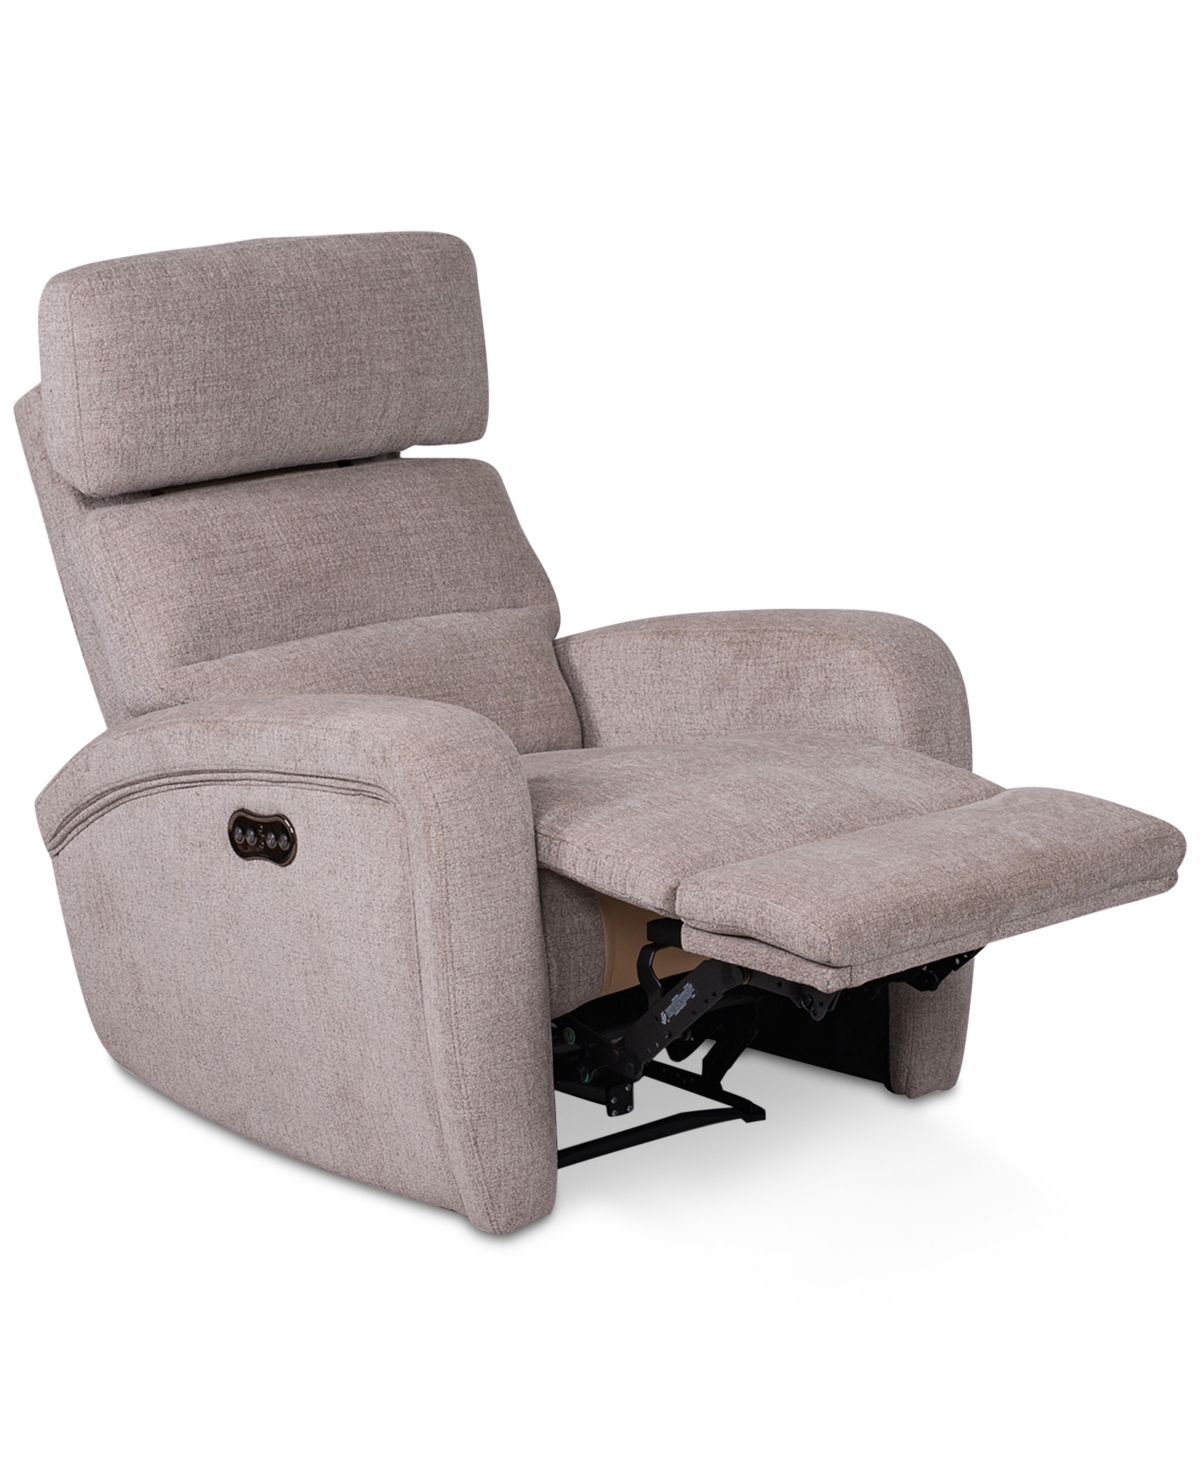 Stellarae Fabric Power Recliner With Power Headrest And Usb Power Outlet, Created for Macys